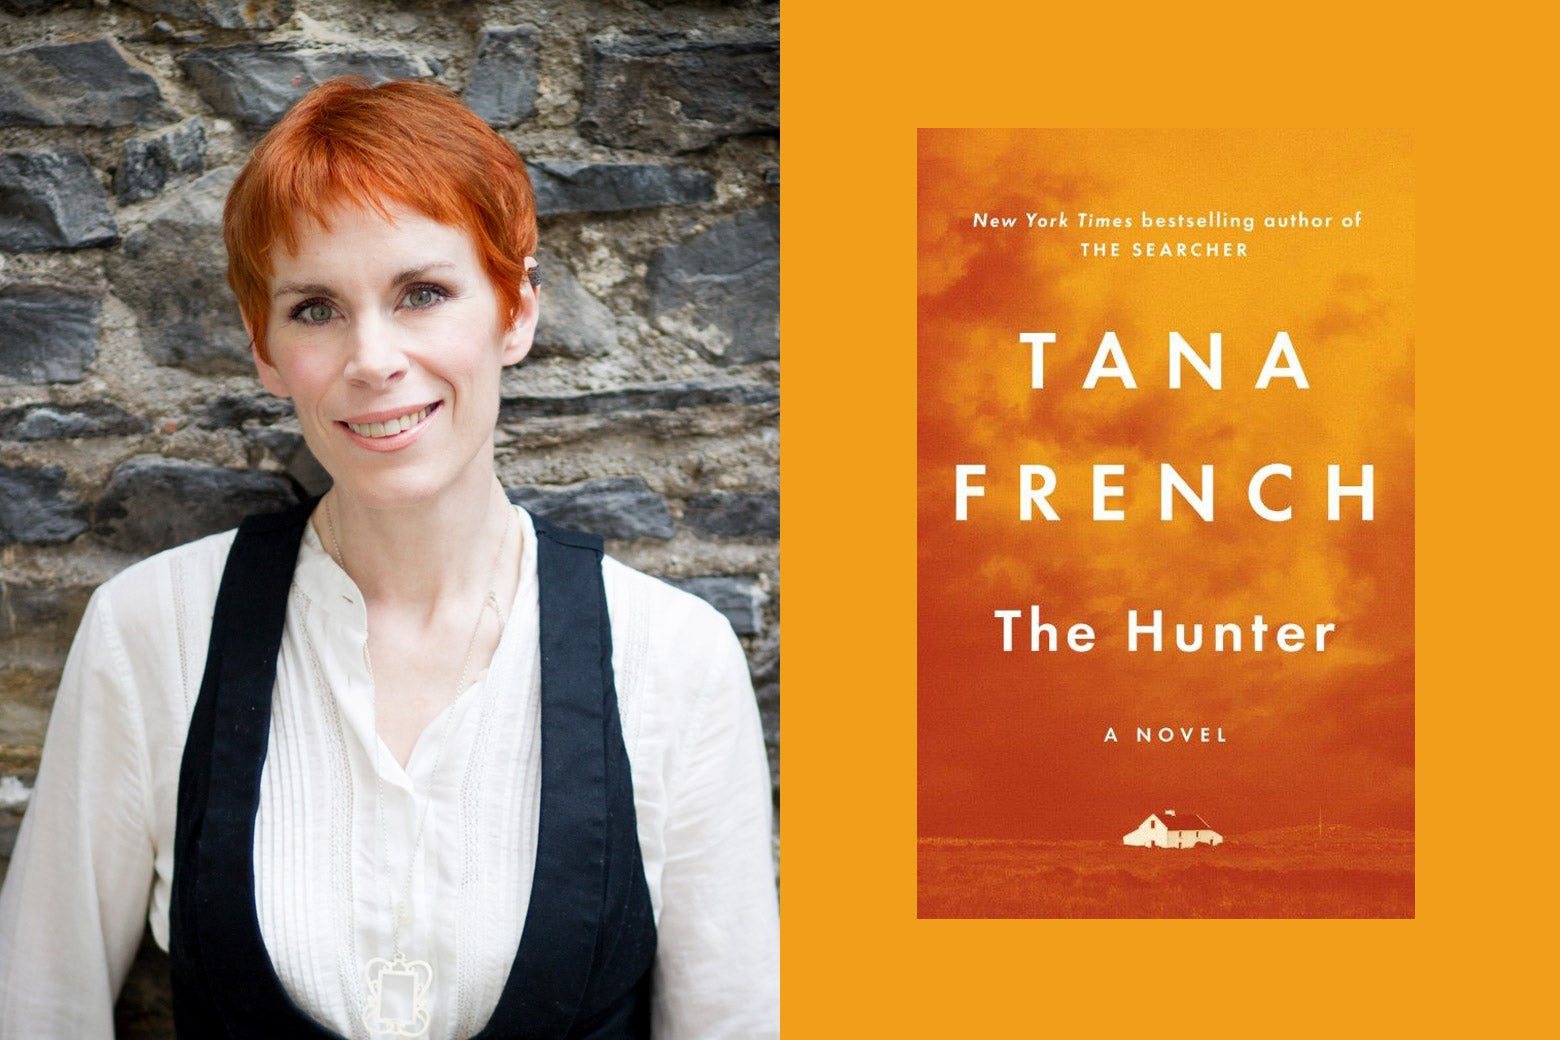 Author Tana French's latest book is The Hunter.